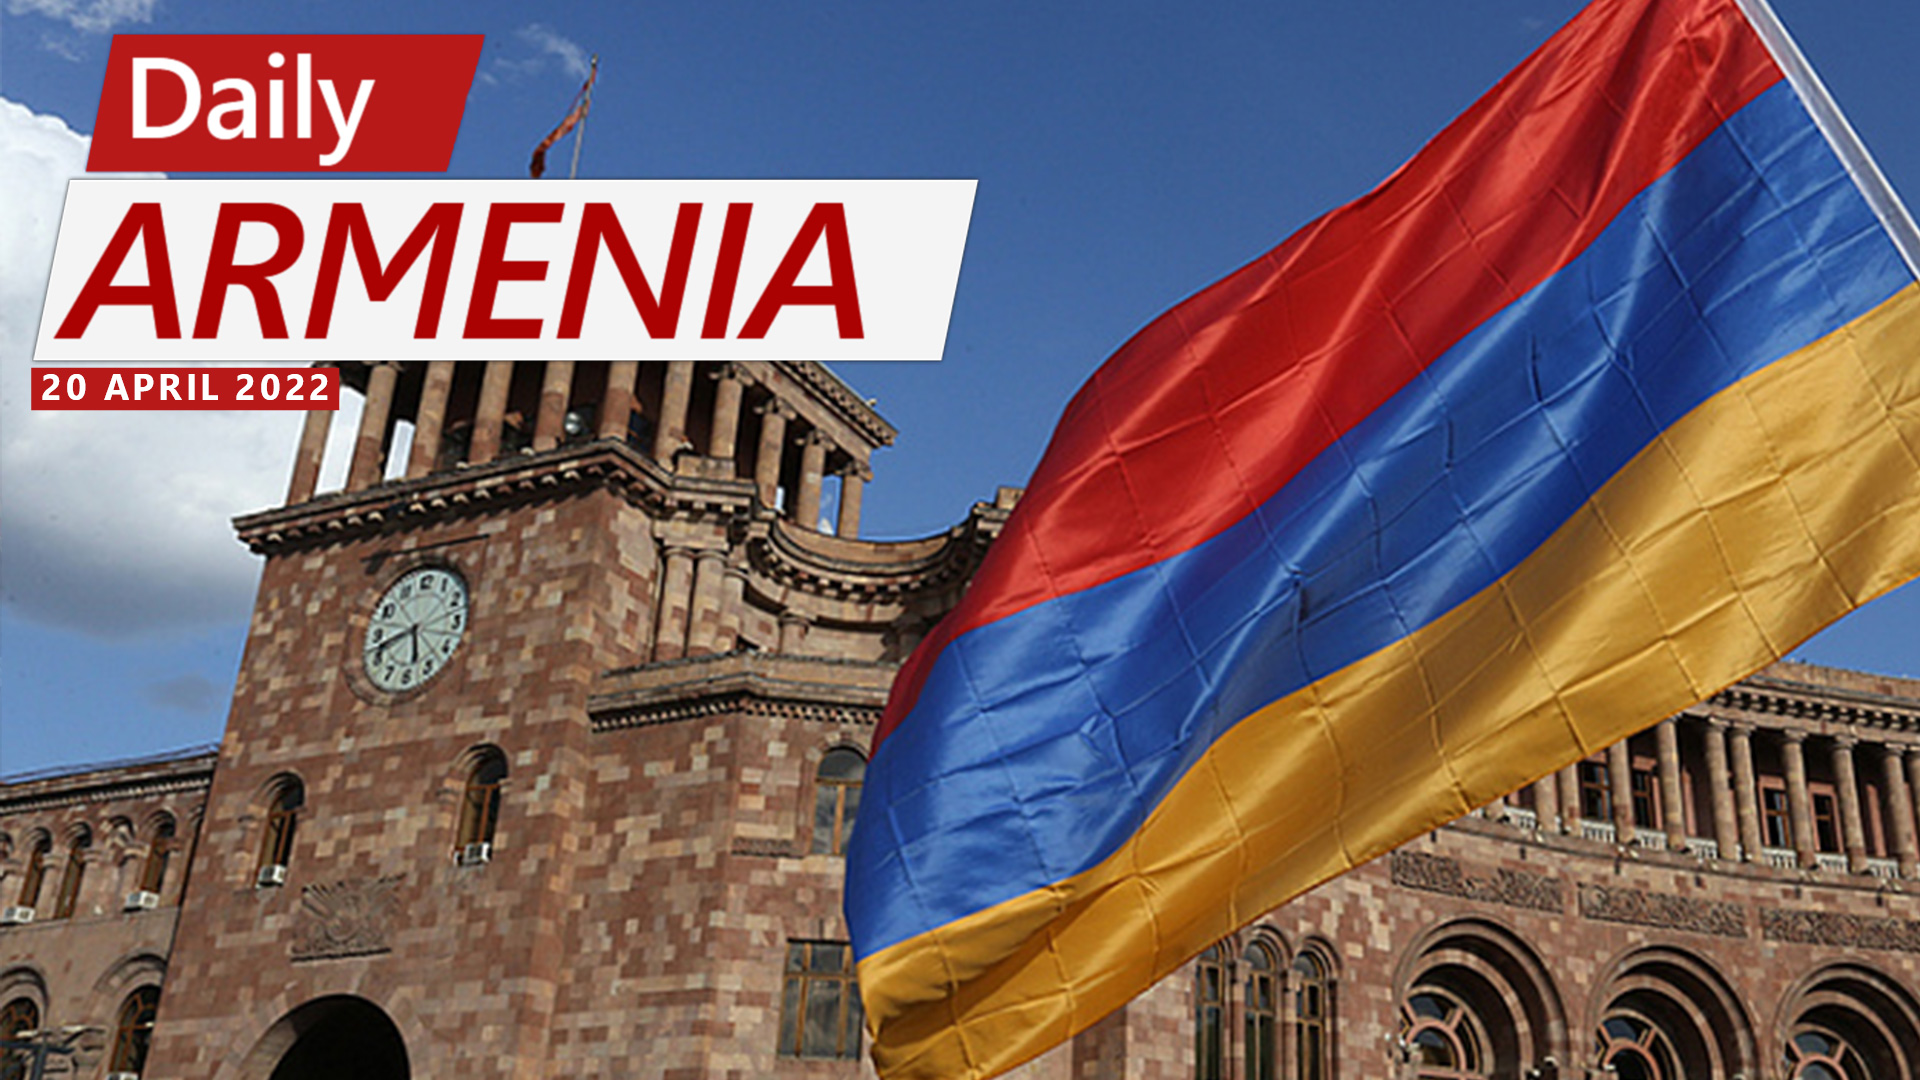 Armenia continues to improve its democracy score, according to new report